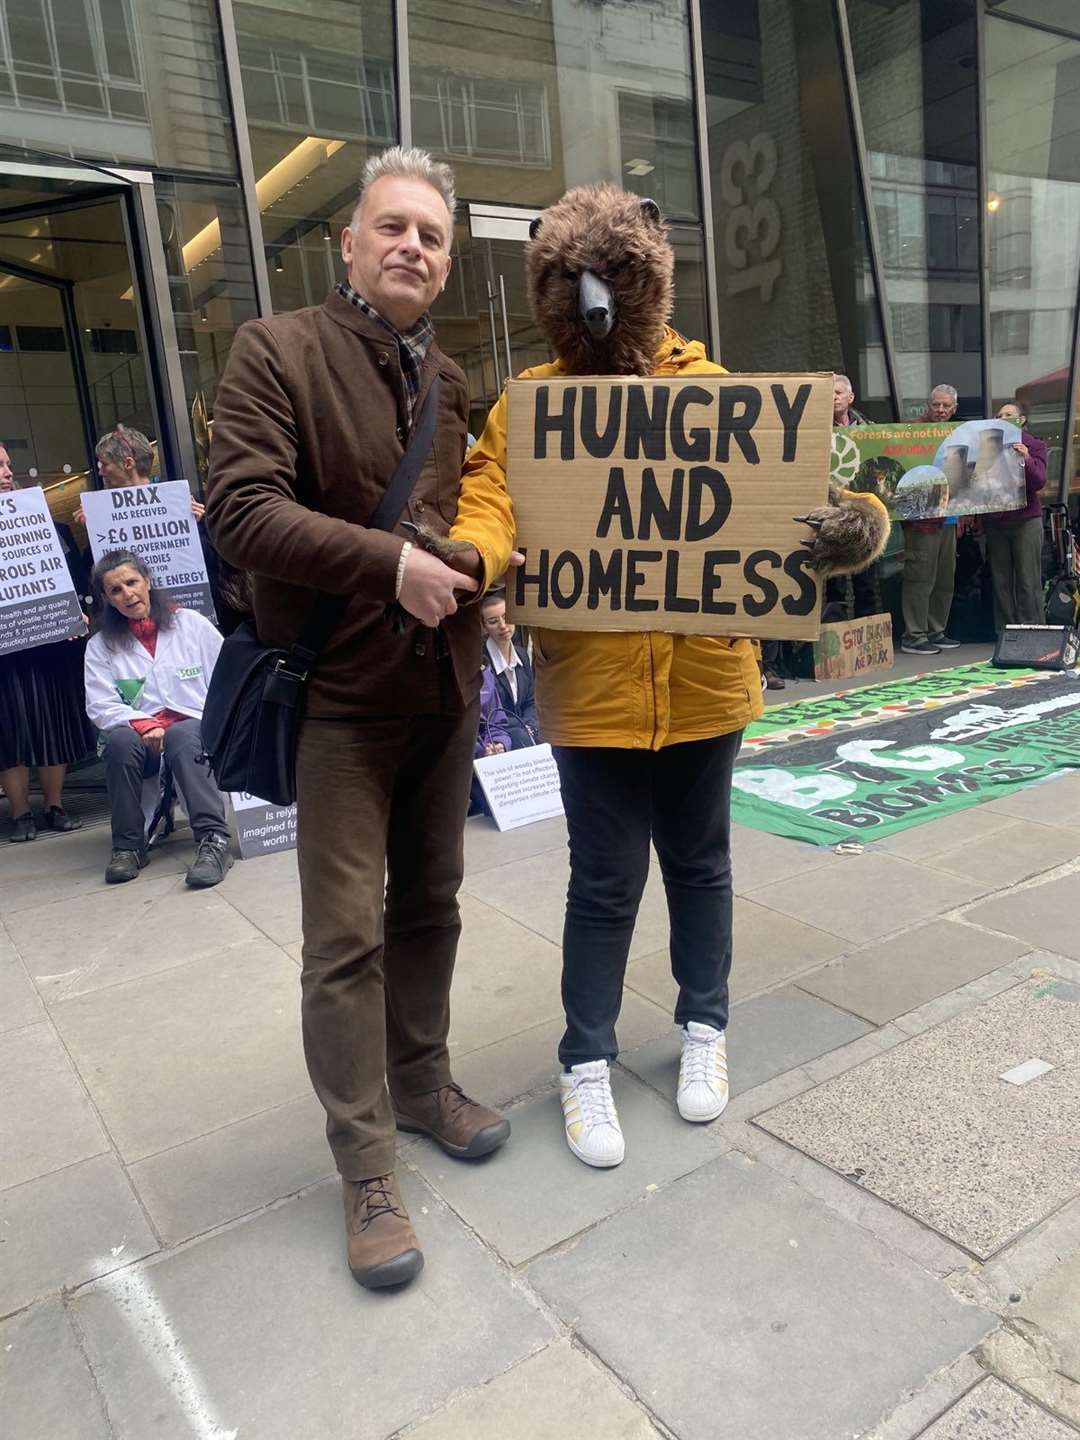 Chris Packham and members of the Axe Drax campaign group outside the Drax AGM in the City of London (Merry Dickinson/PA)